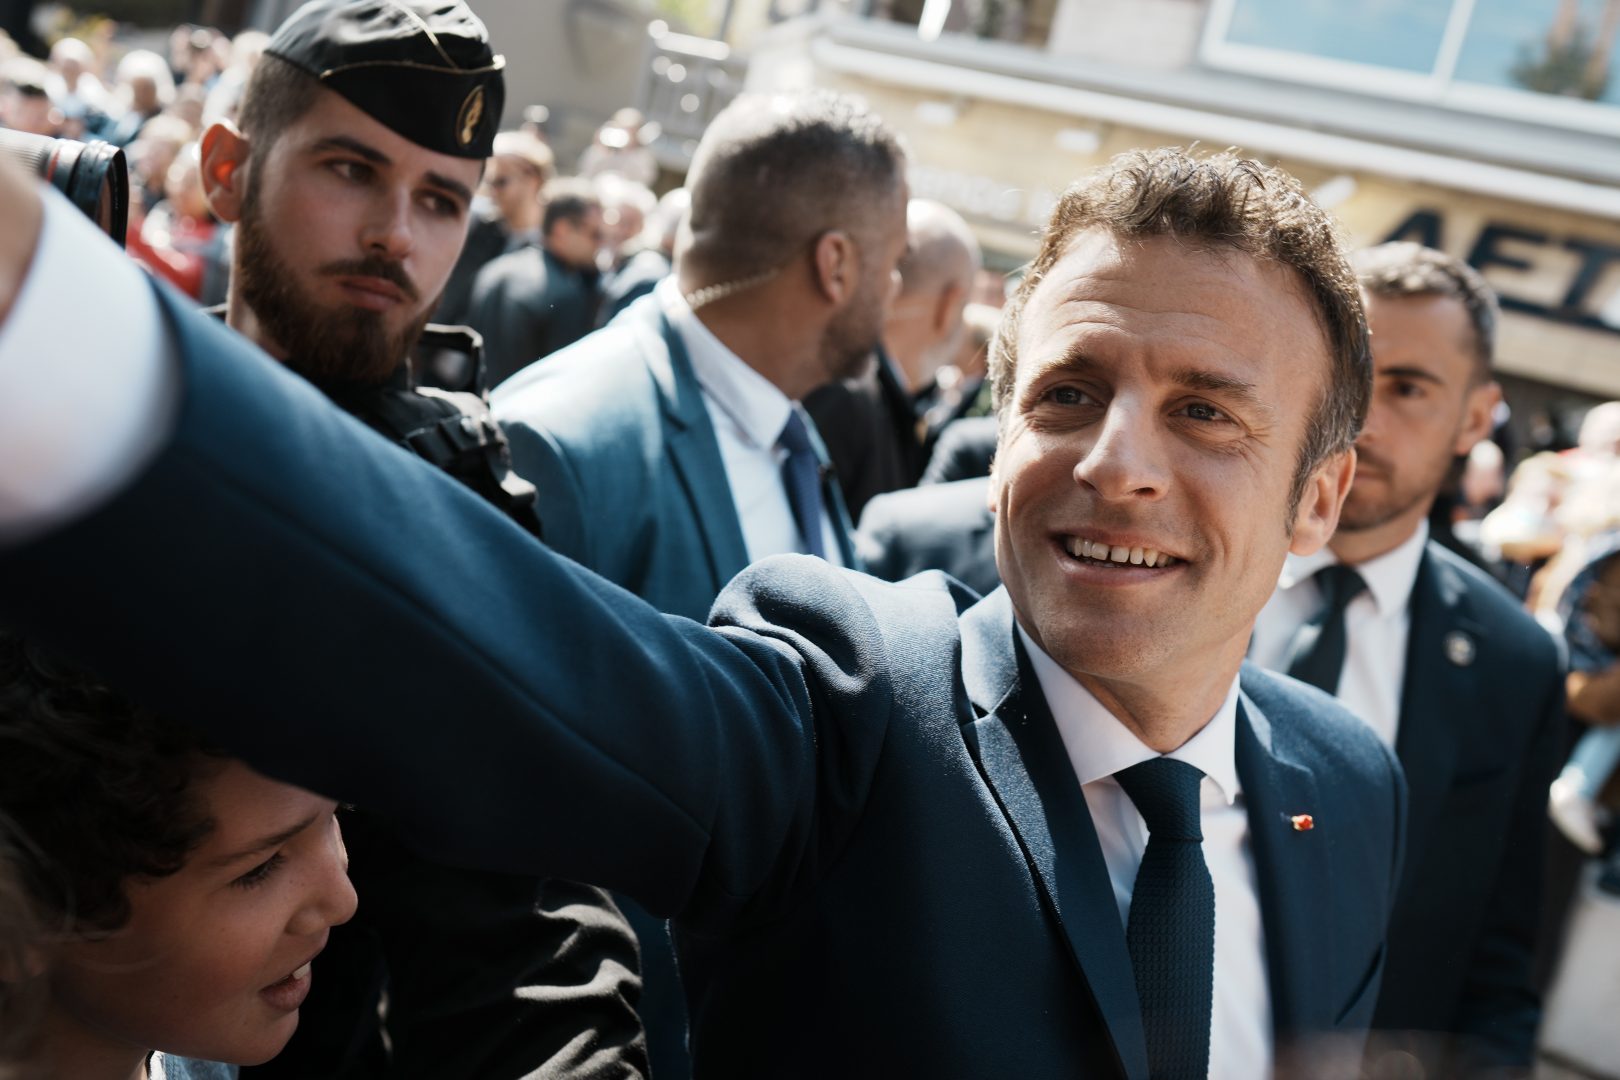 Emmanuel Macron shakes hands with well-wishers